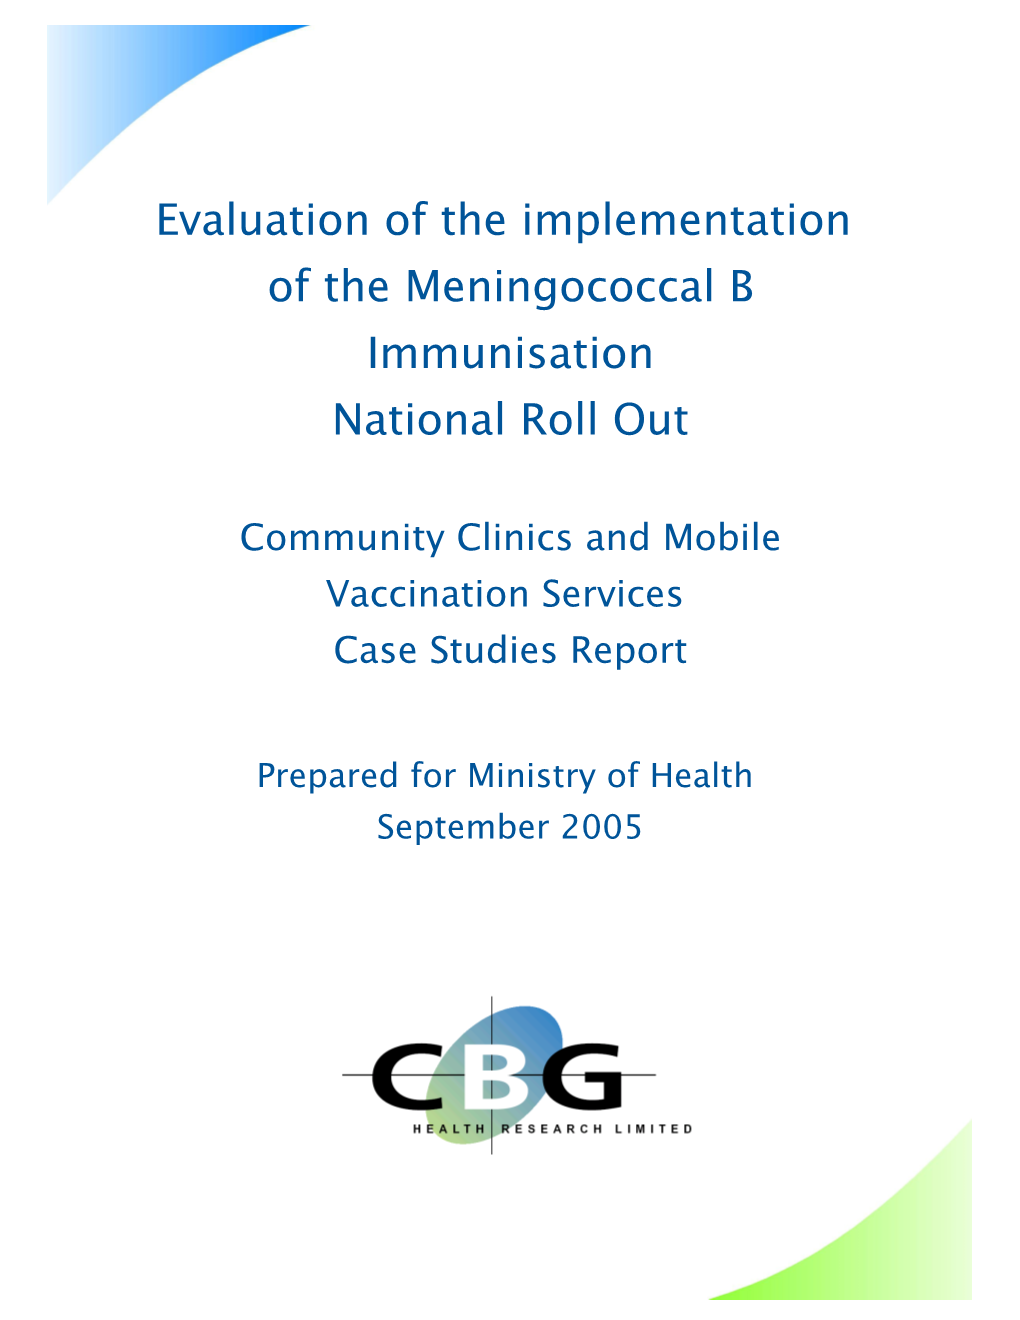 Community Clinics and Mobile Vaccination Services Case Studies Report